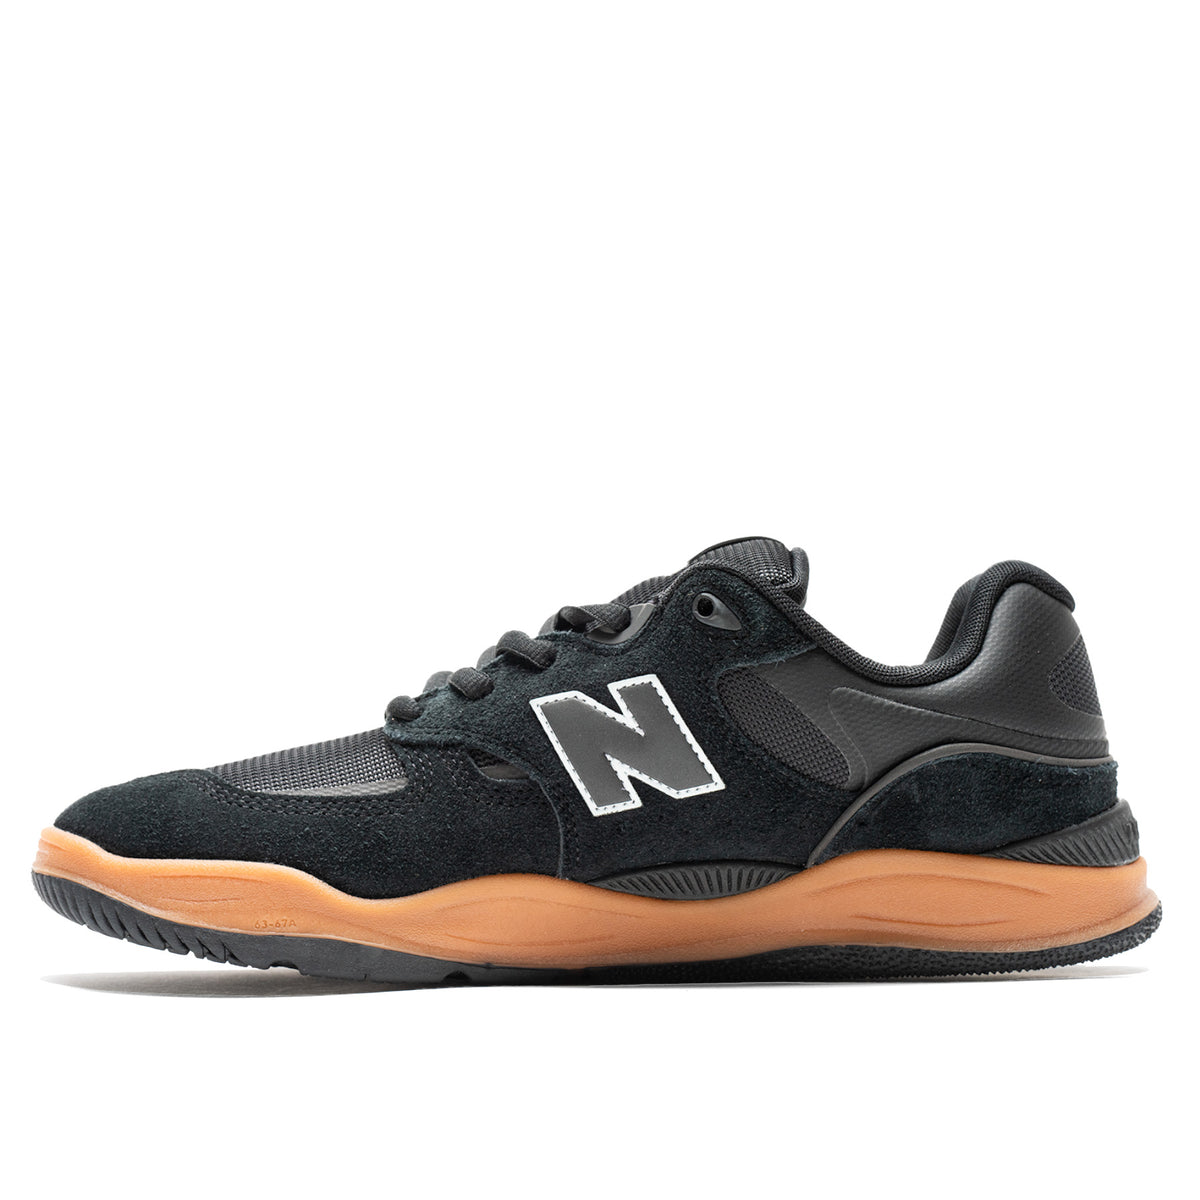 New Balance Numeric 1010 BC Black Suede With and Gum Sole